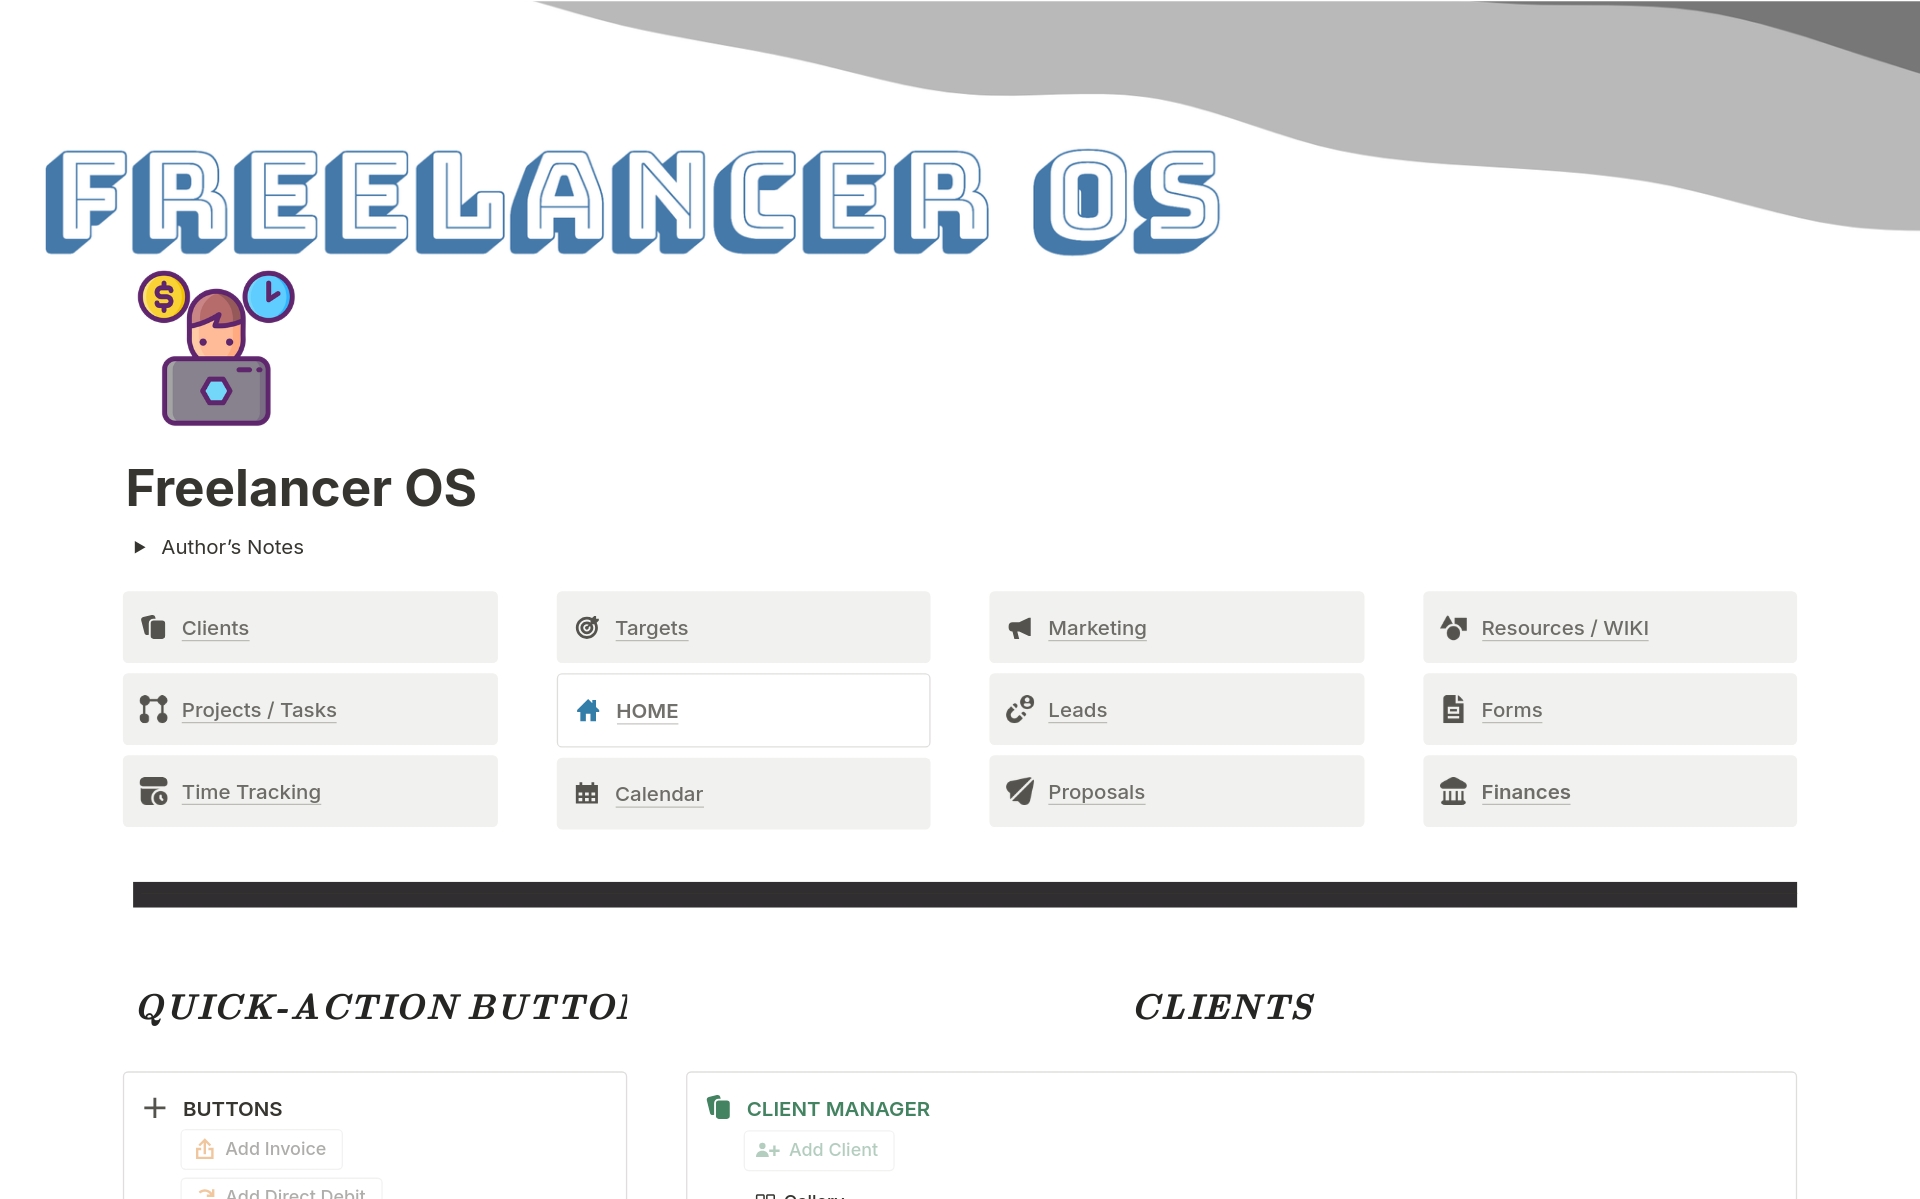 Freelancer OS provides everything you need to efficiently manage and scale your business. From client management to financial tracking, this has you covered.